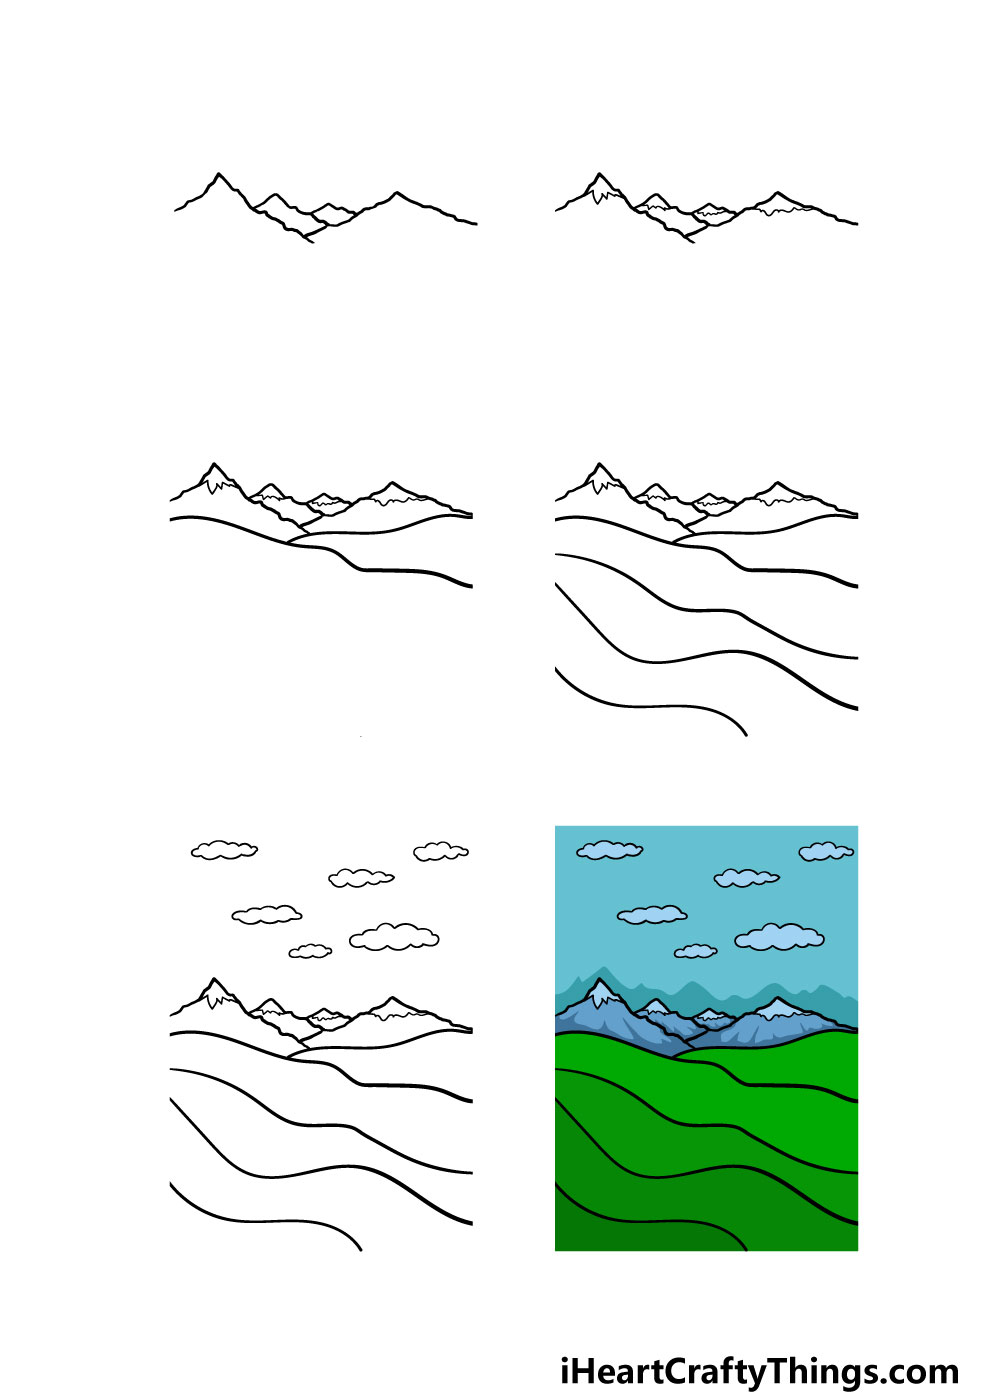 Cartoon Background Drawing - How To Draw A Cartoon Background Step By Step